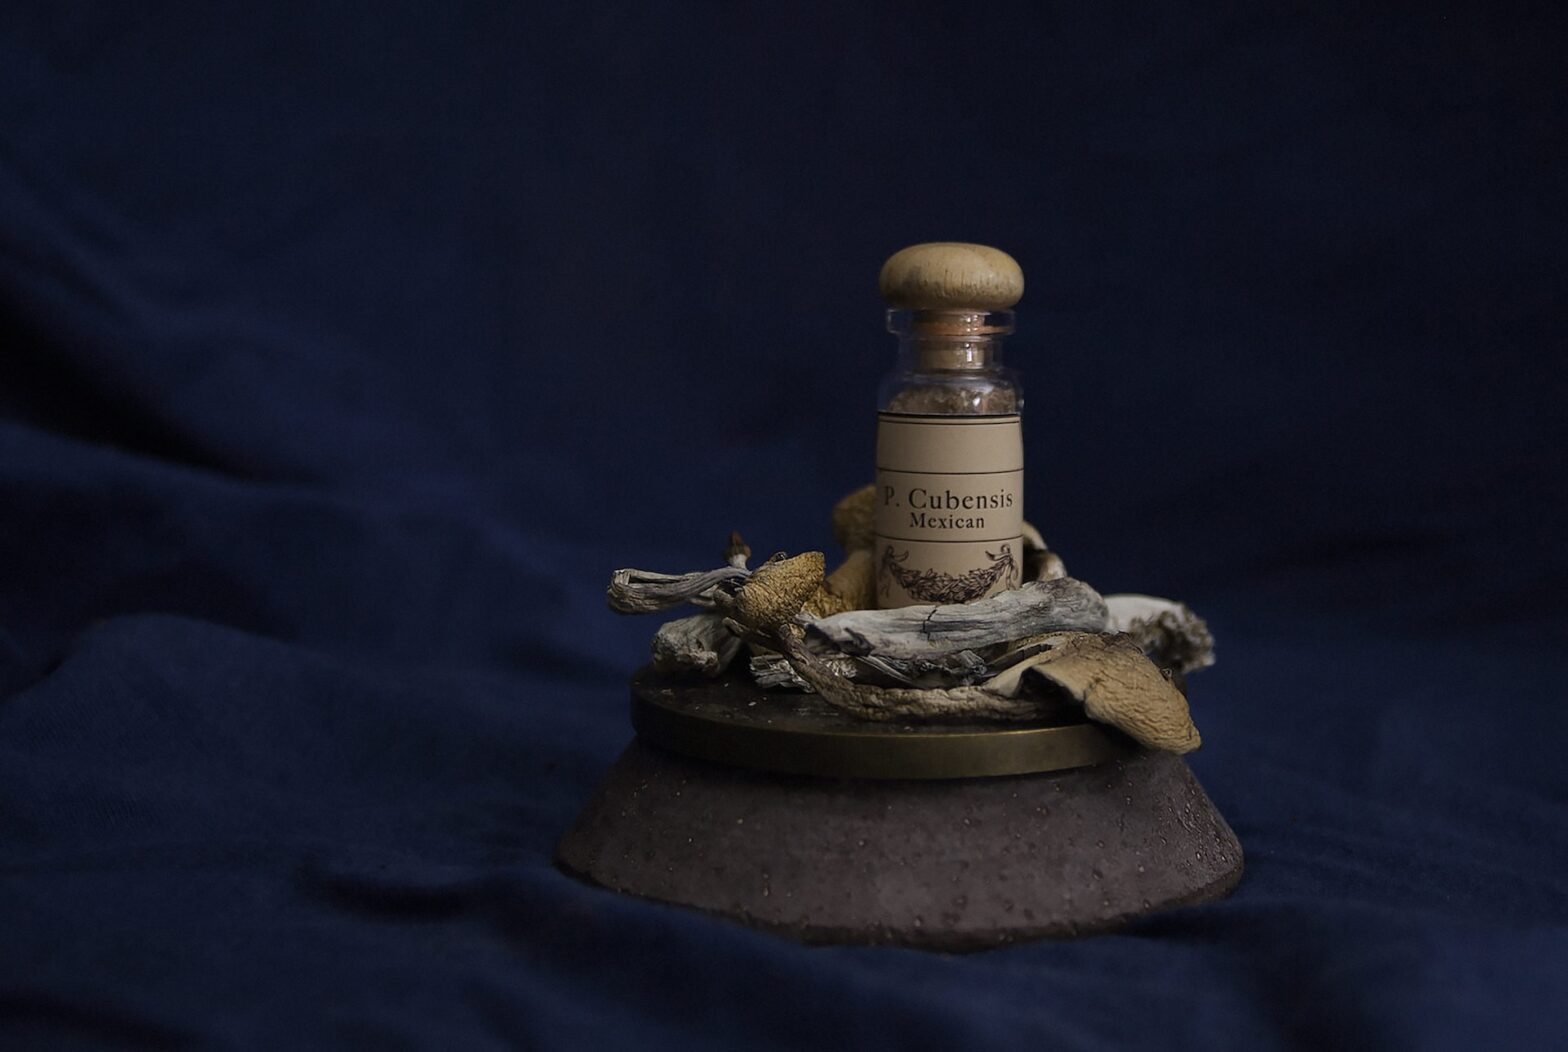 a medical vial labled cubenesis mexican, siting on top of a pile of what appear to be dried mushrooms, on a pendastal, black background